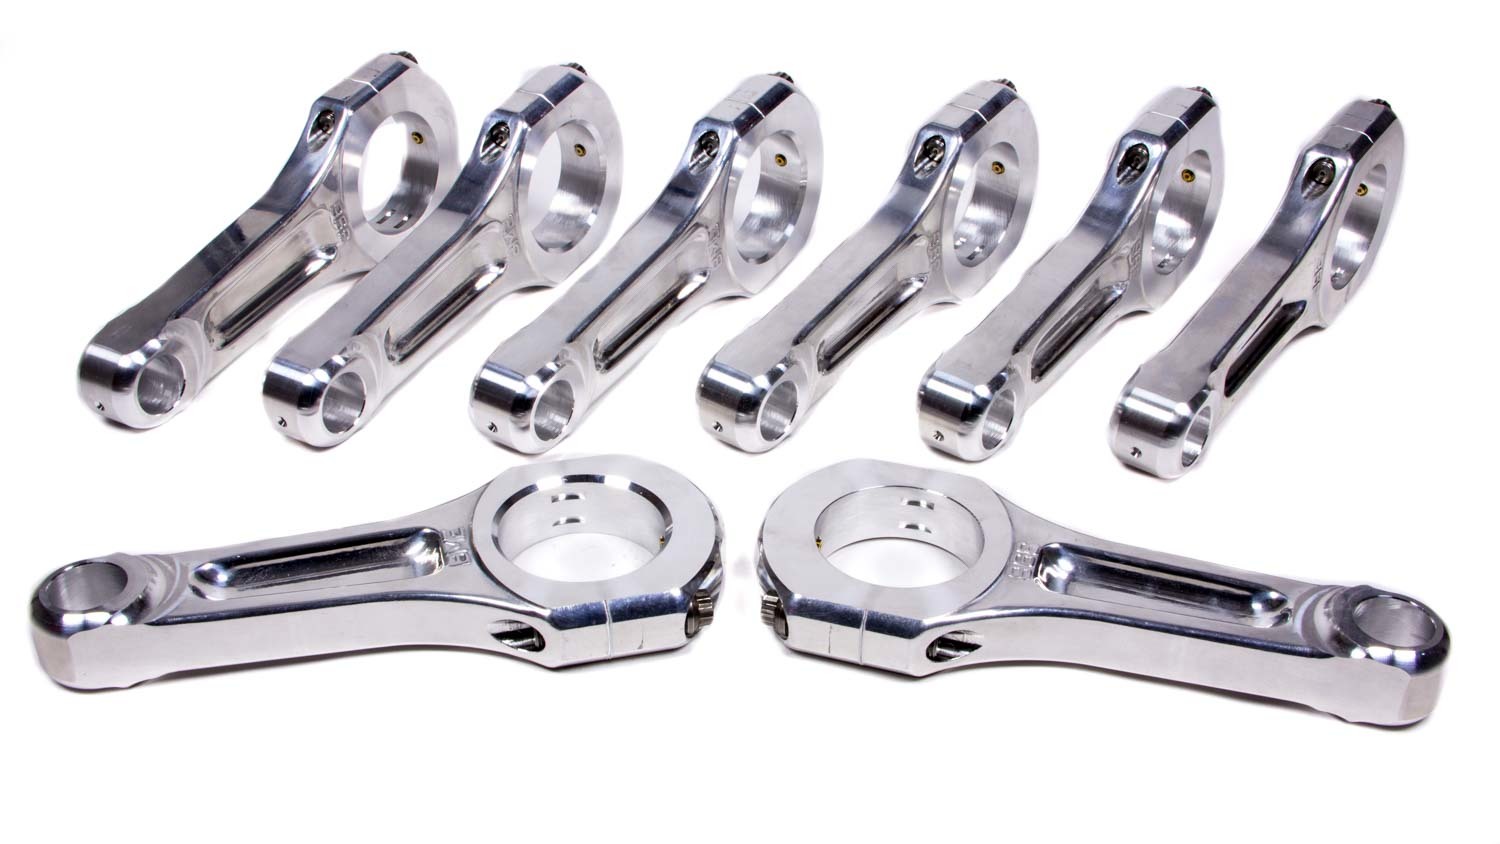 Bill Miller 396250 Connecting Rod, I Beam, 6.385 in Long, Bushed, 7/16 in Cap Screws, Forged Aluminum, Big Block Chevy, Set of 8